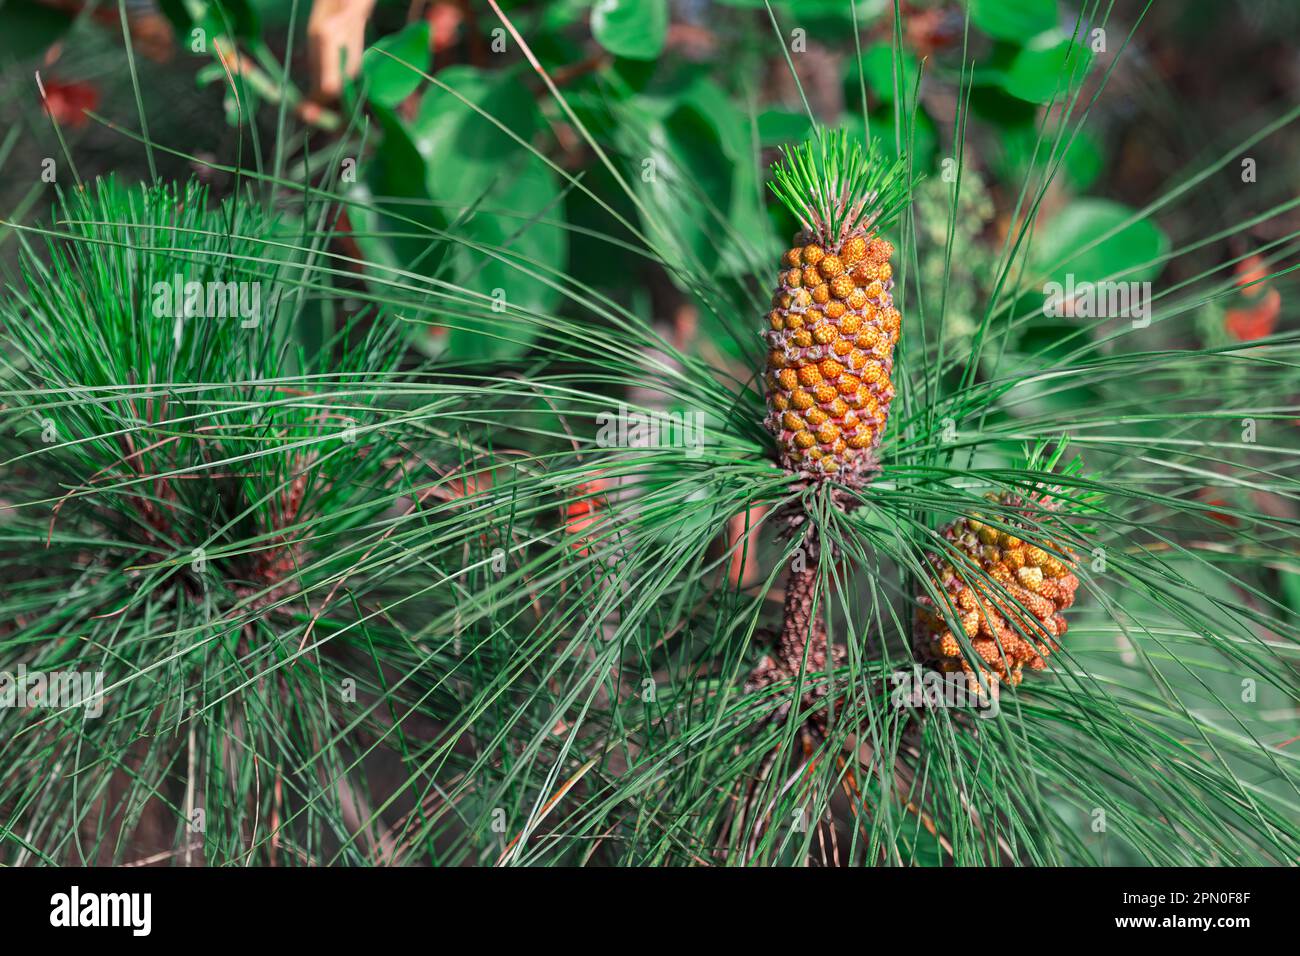 Conifer needles with cones . Evergreen coniferous branch Stock Photo